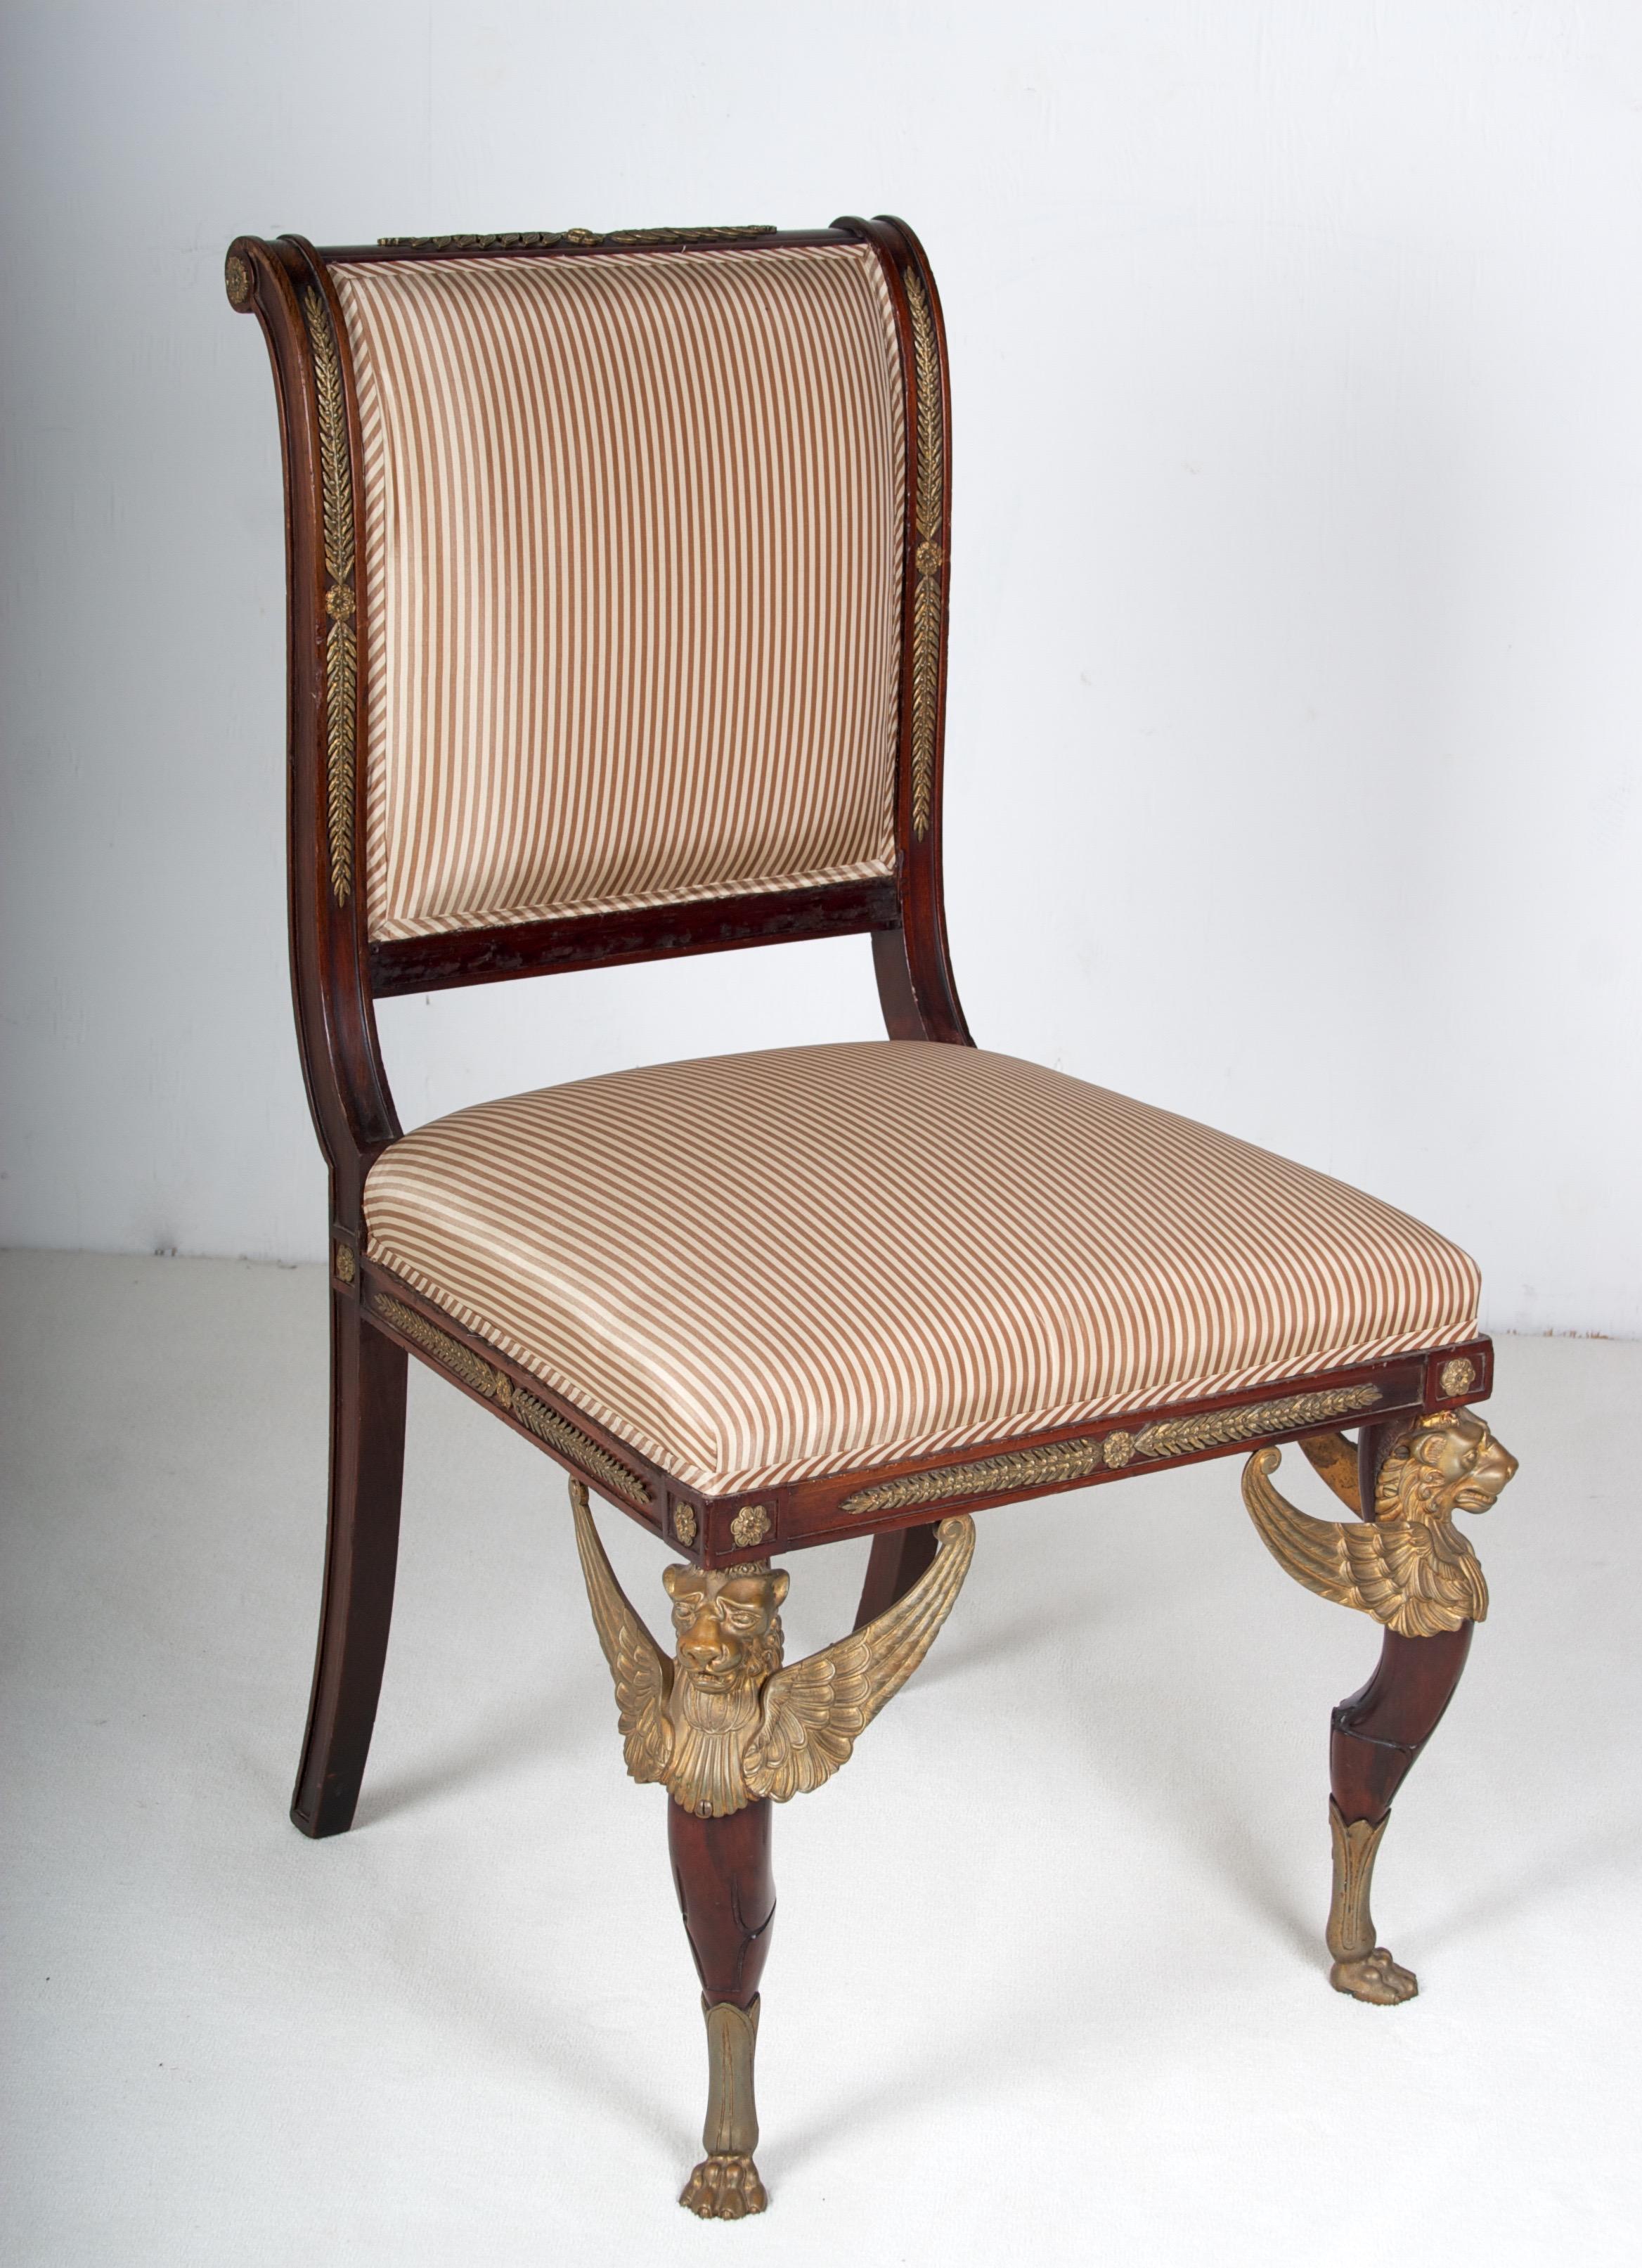 A excellent quality late 19th century mahogany side chair in the French empire style with superb
ormolu mounts probably by EH Kahn & Co. London.
Back, side rail, seat rails are all decorated with foliate and rosette ormolu mounts,
supported on